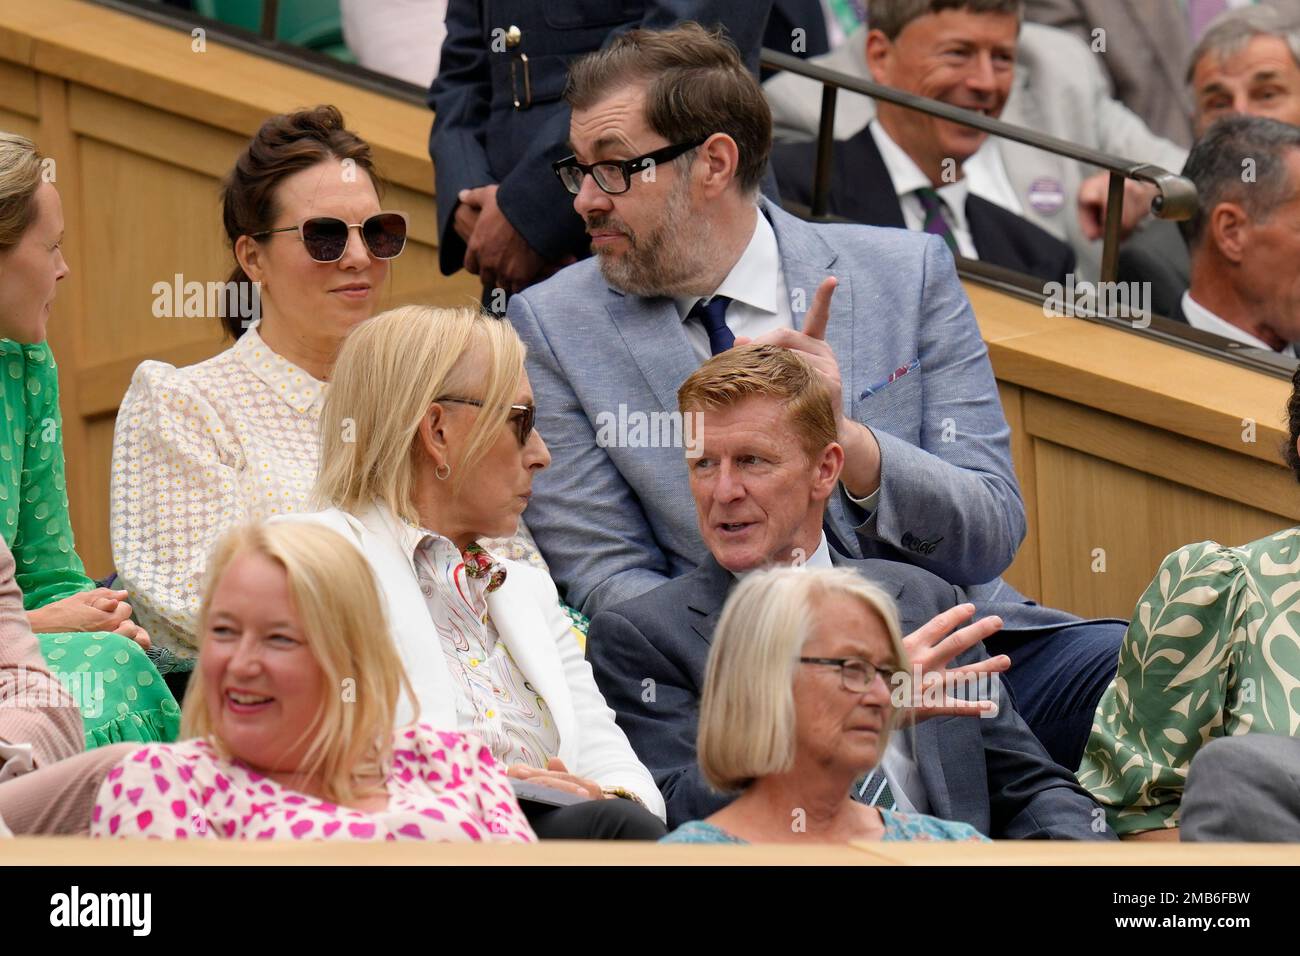 Tennis great Martina Navratilova, center left, and British astronaut Tim Peake, center right, take their seats to watch a first round singles match on day one of the Wimbledon tennis championships in